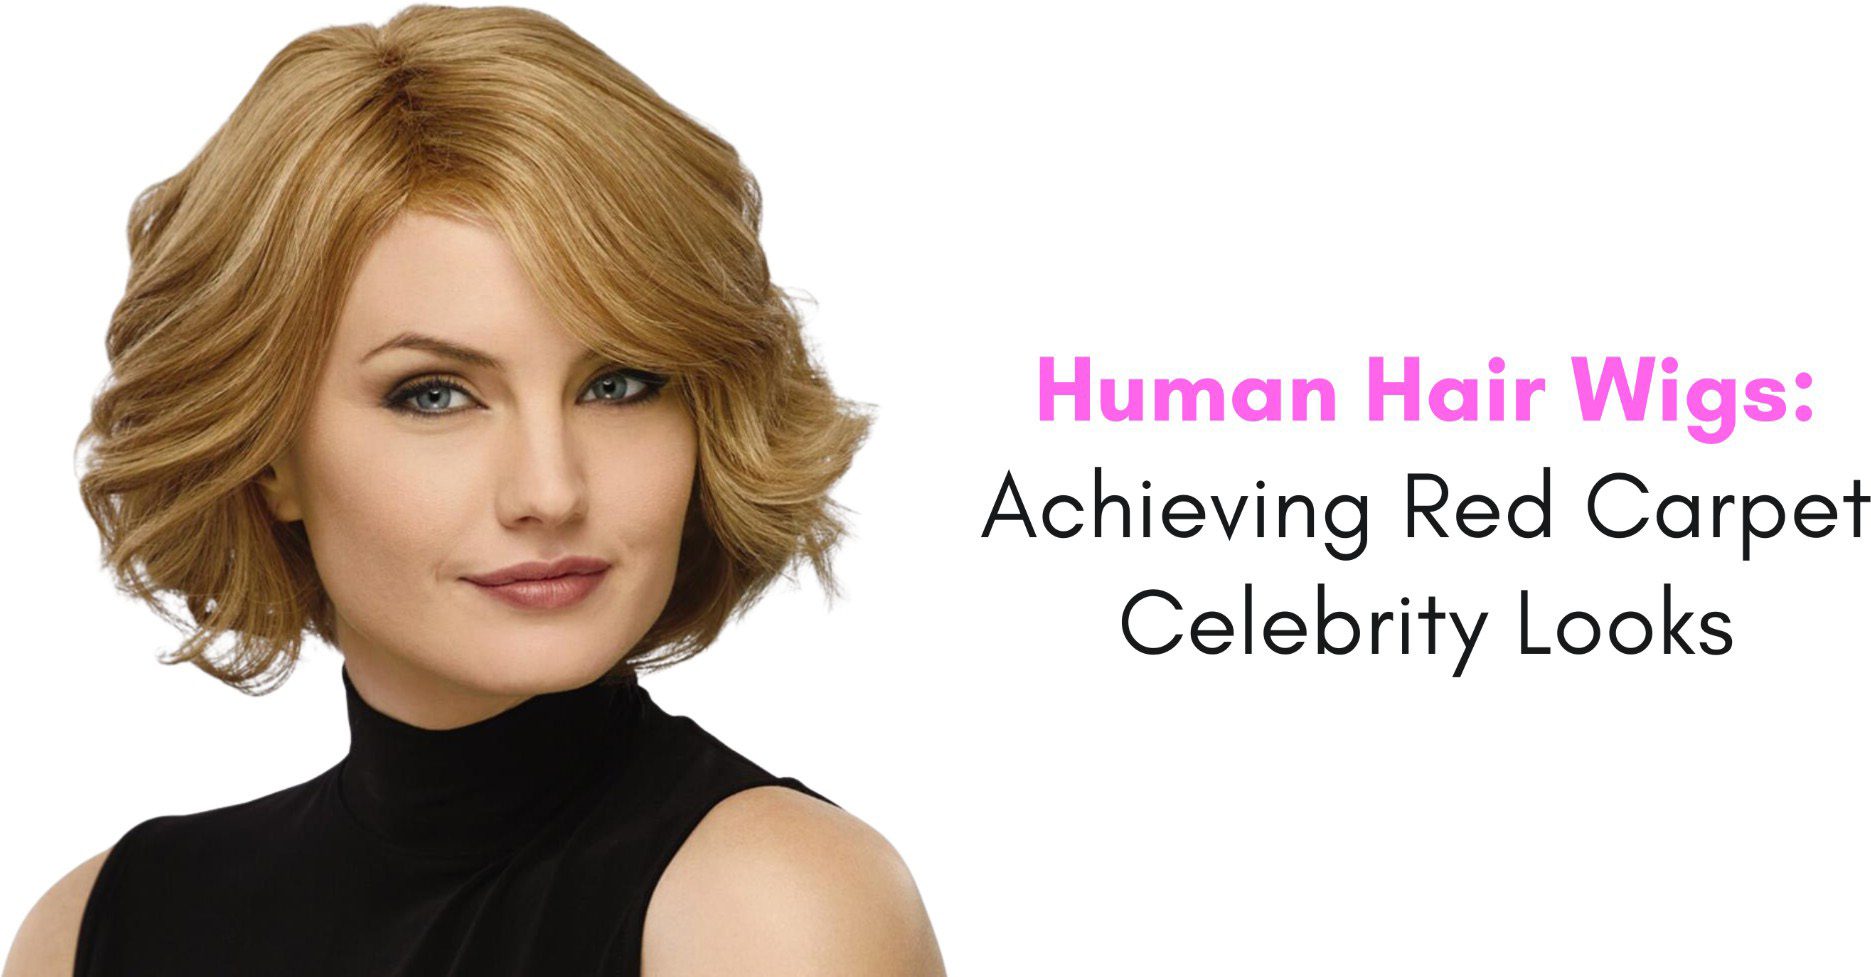 Human Hair Wigs: Achieving Red Carpet Celebrity Looks